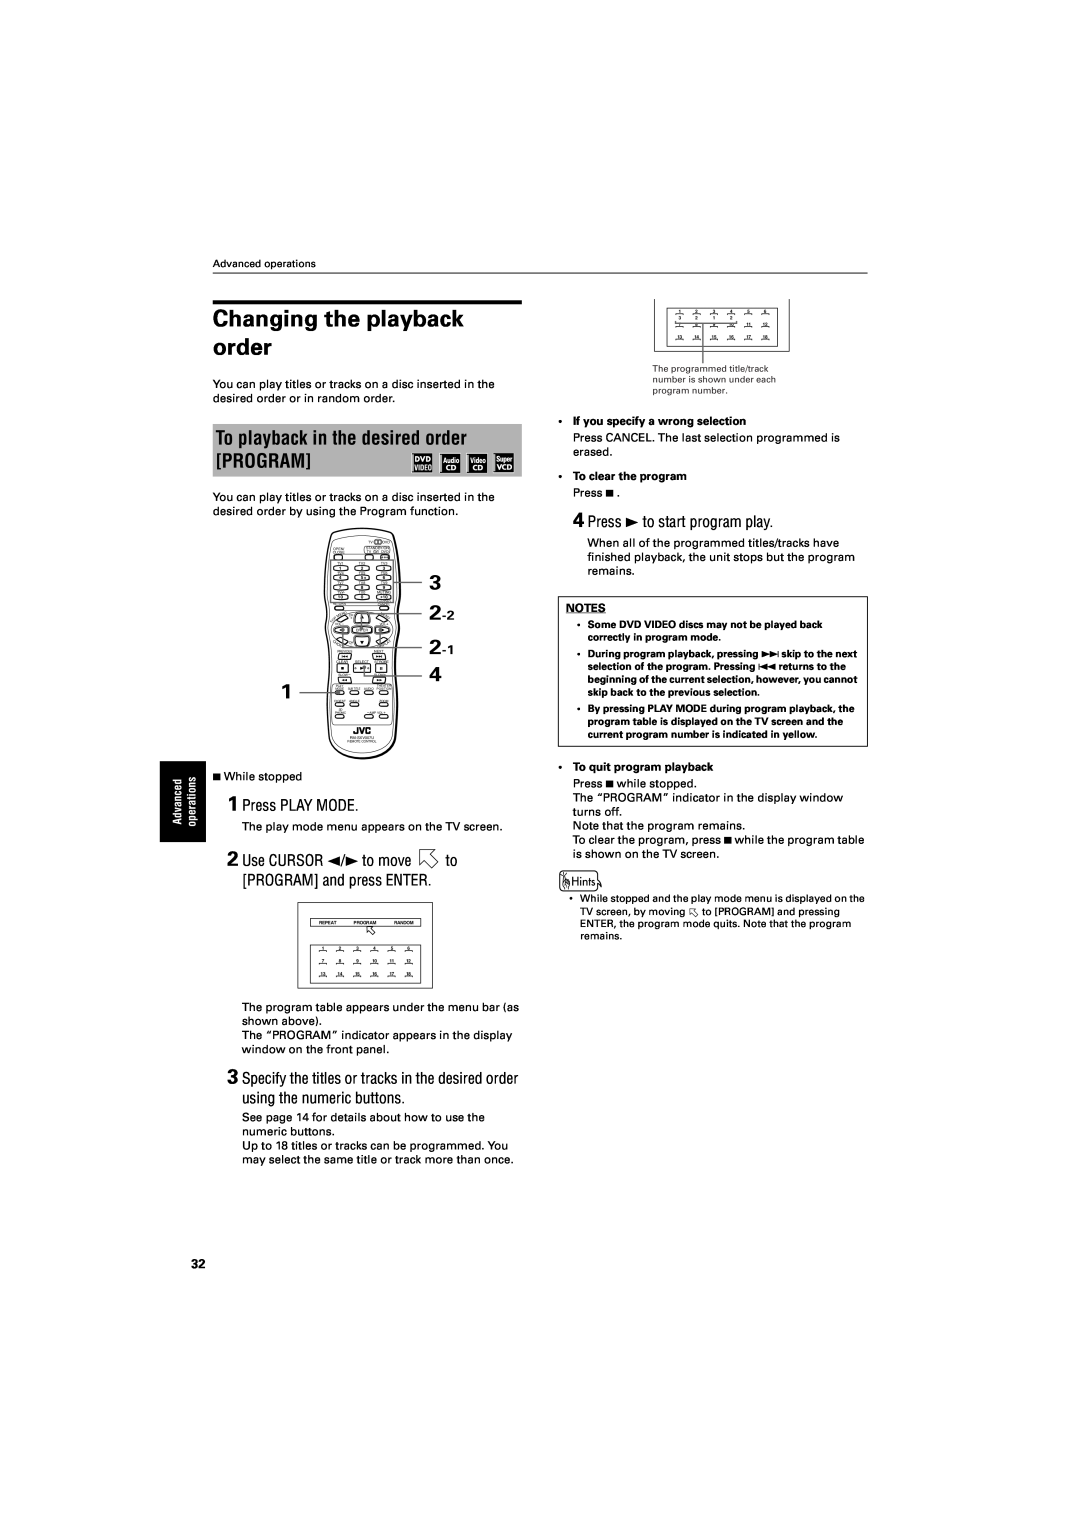 JVC GNT0013-014A Changing the playback order, To playback in the desired order PROGRAM, Press 3 to start program play 